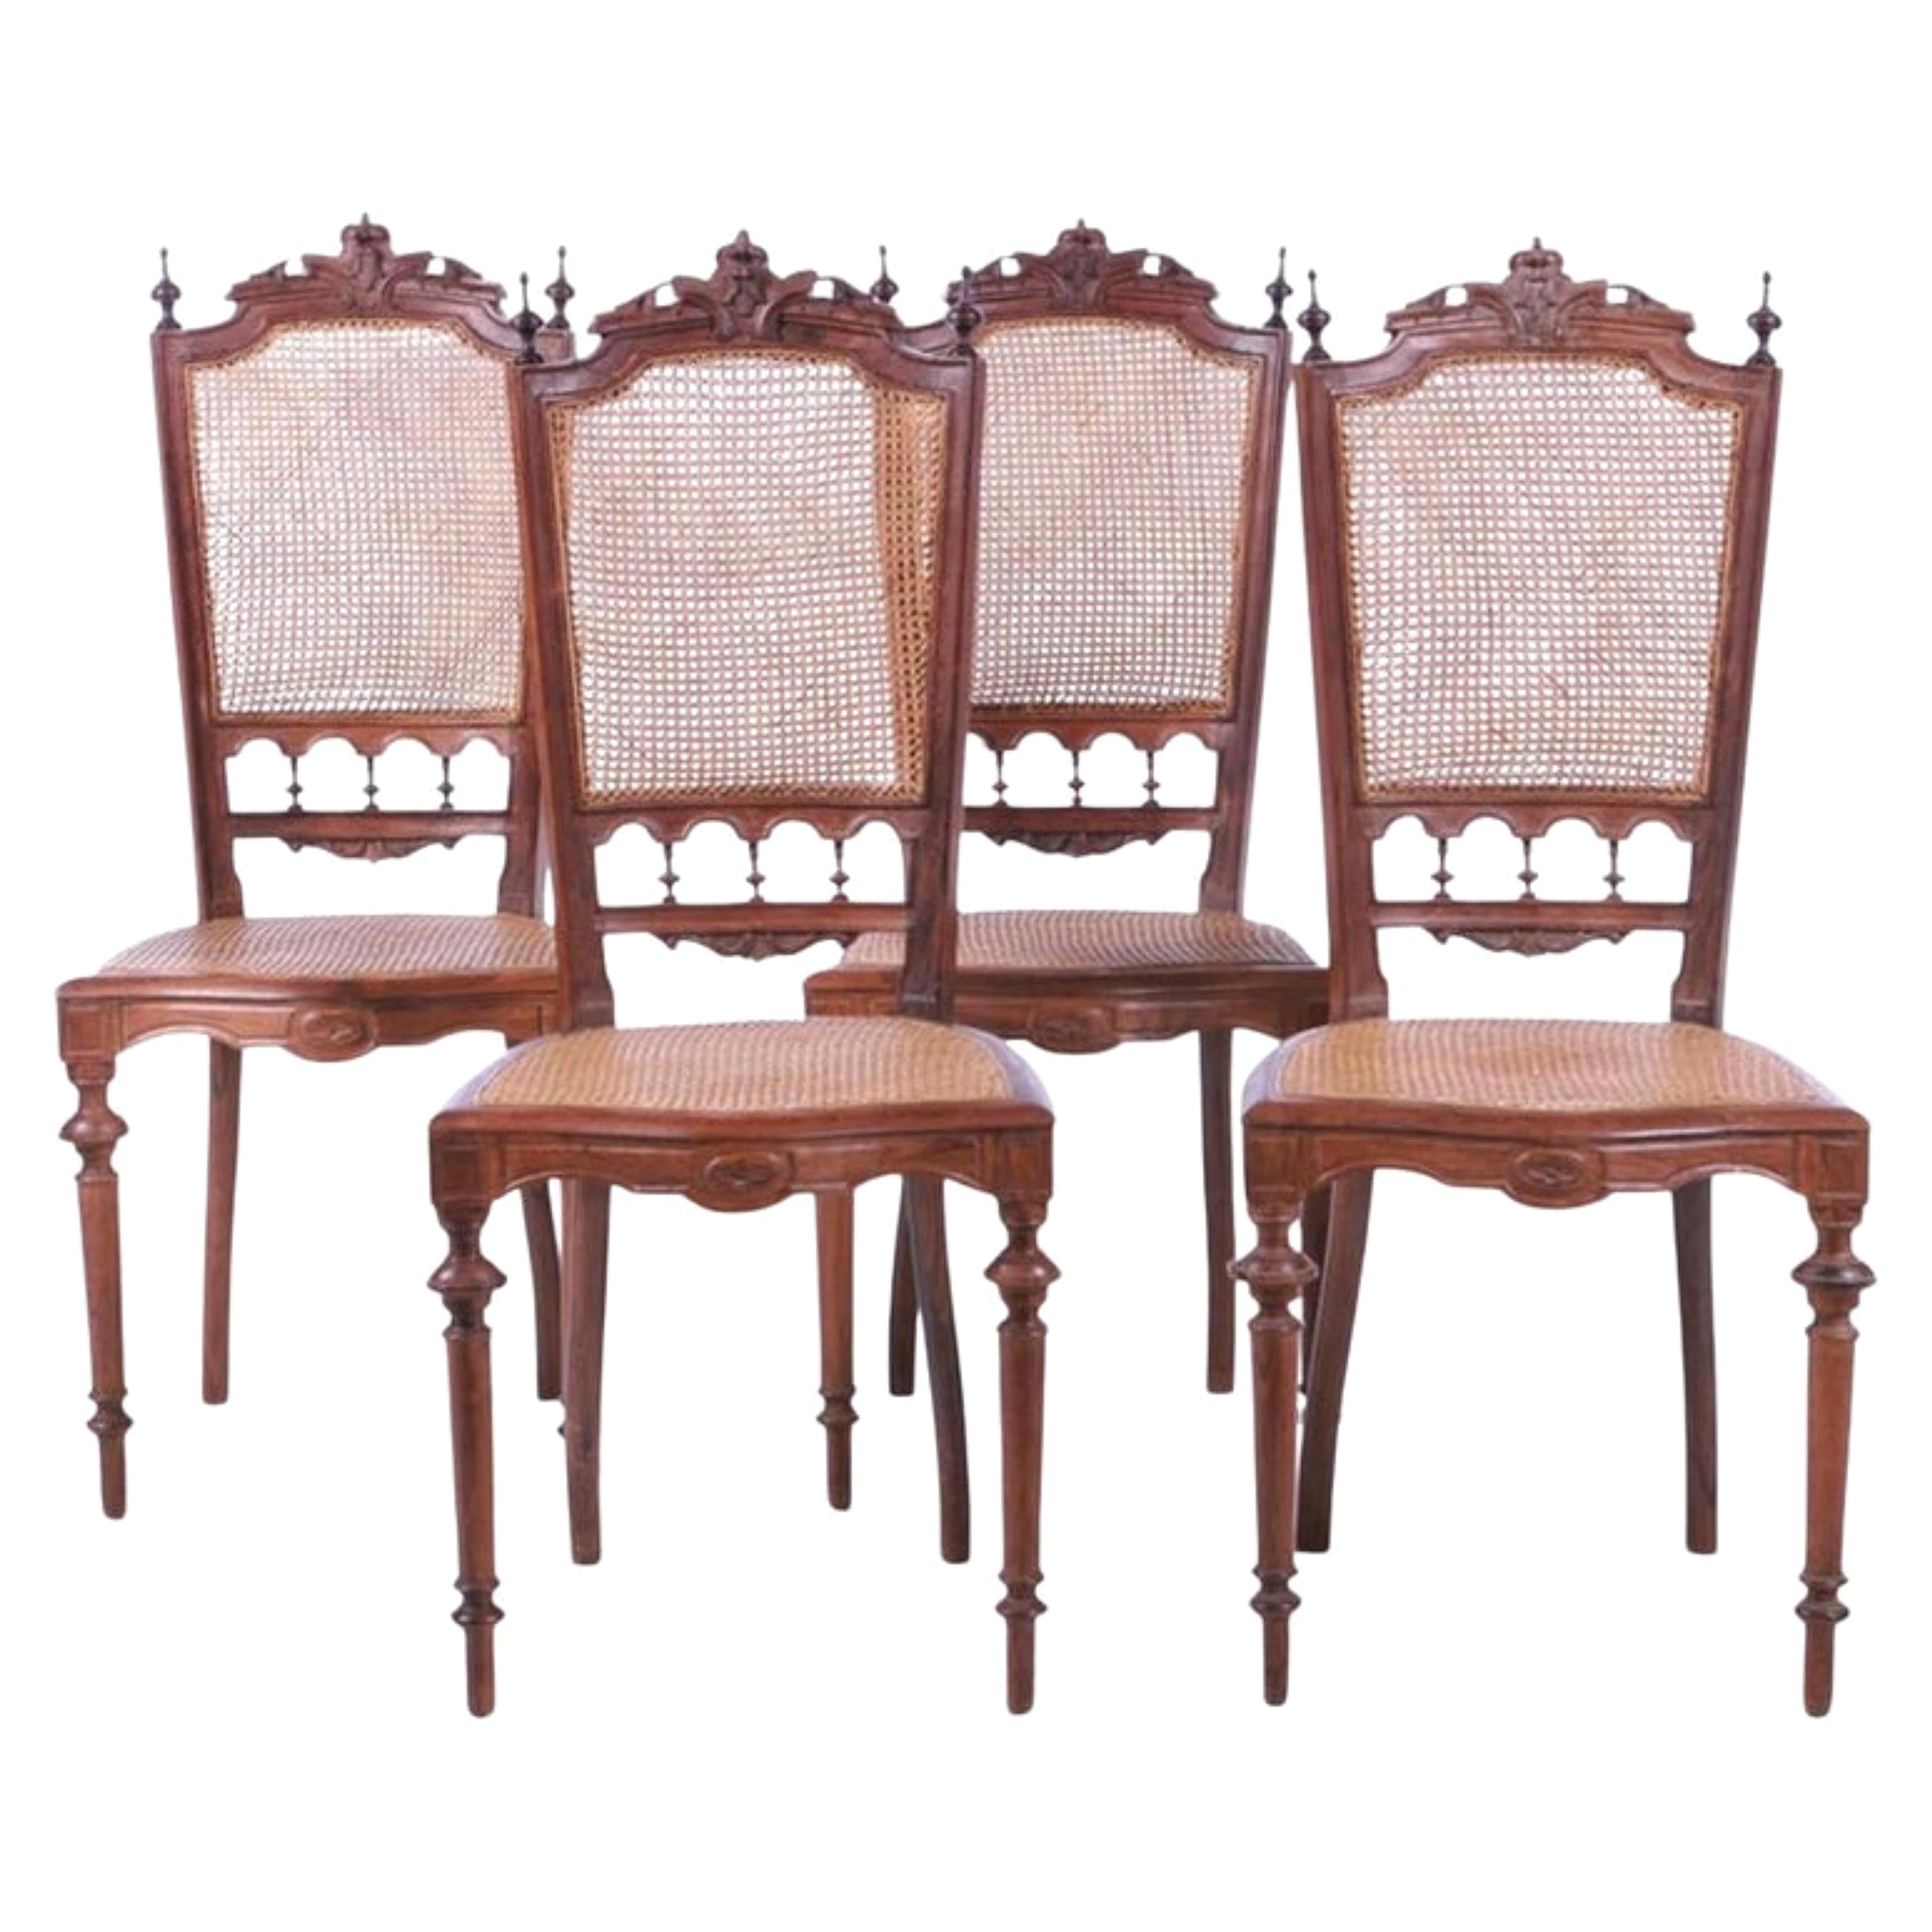 4 Portuguese Chairs 19th Century in Brazilian Rosewood For Sale